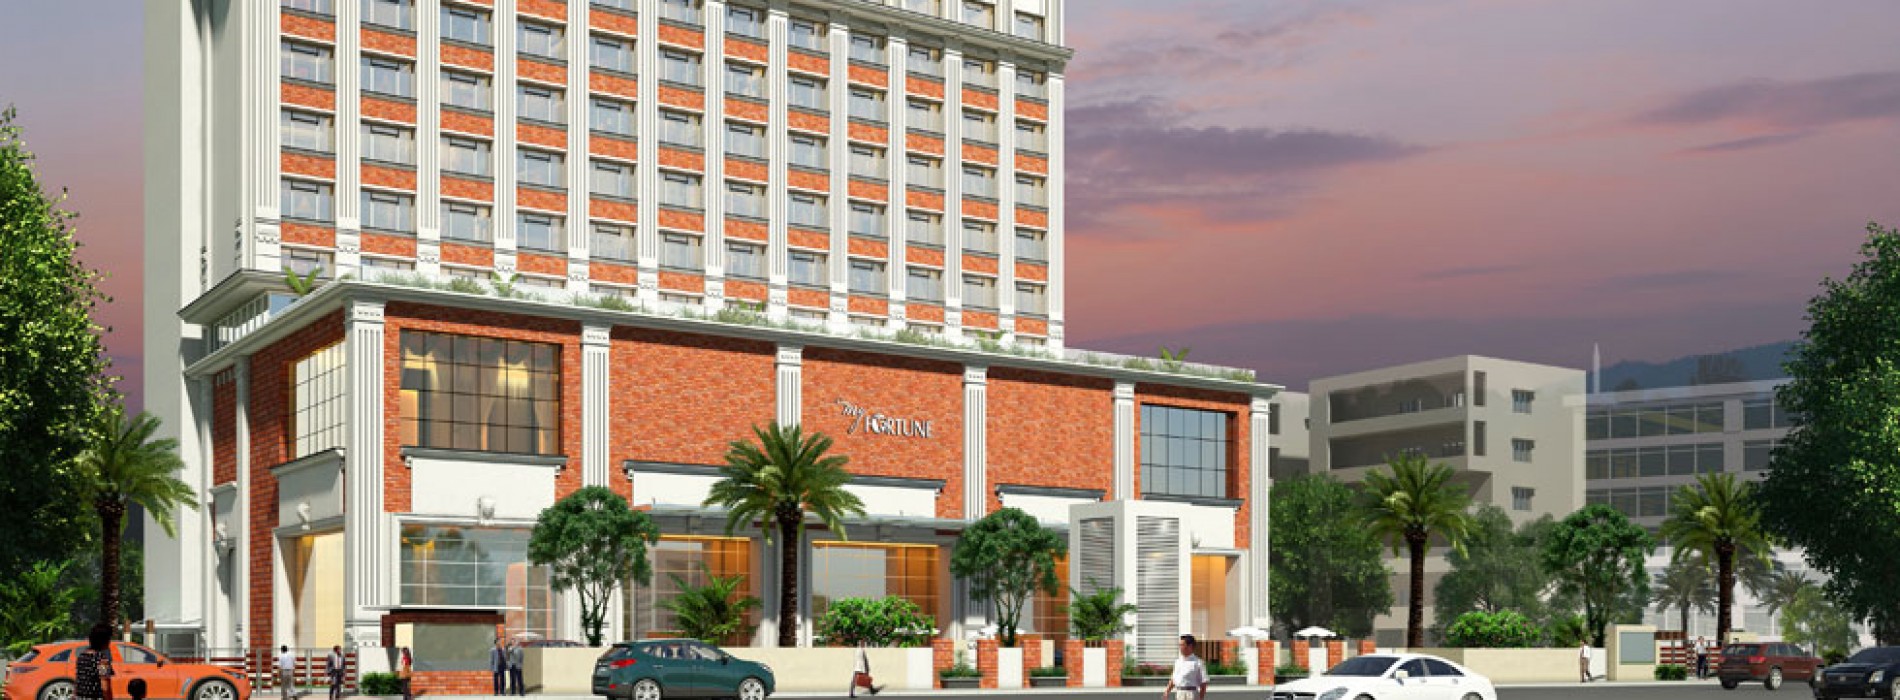 ITC Ltd. announces the Foundation Stone laying ceremony of ‘My Fortune, Guntur’